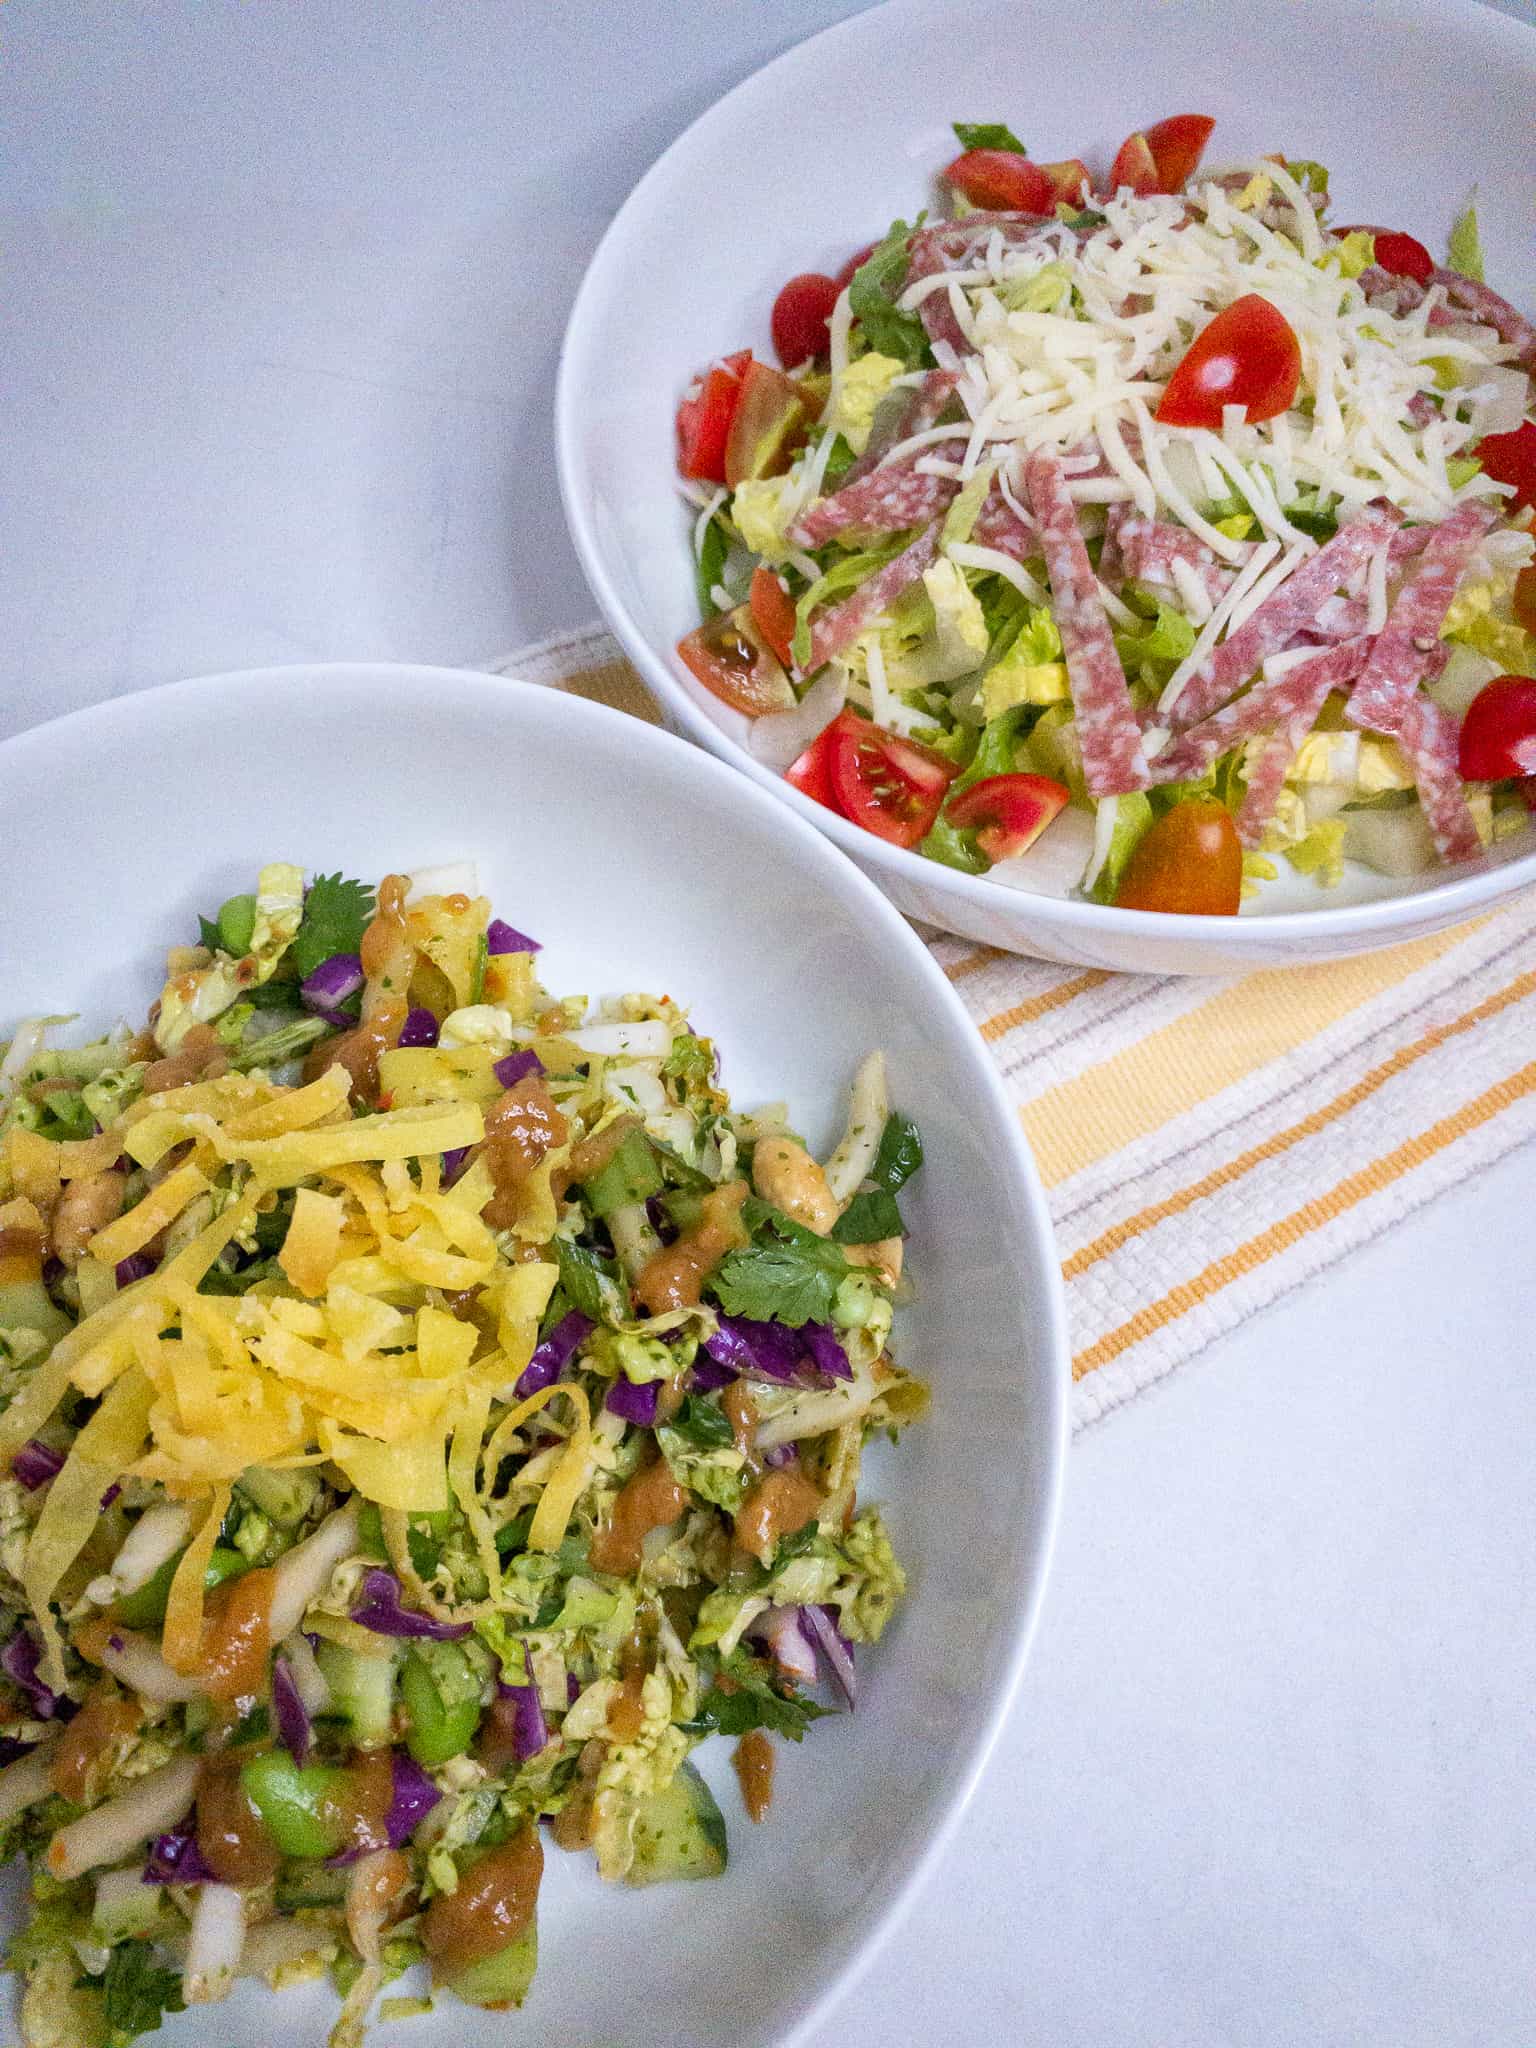 Homemade, not-quite CPK salads